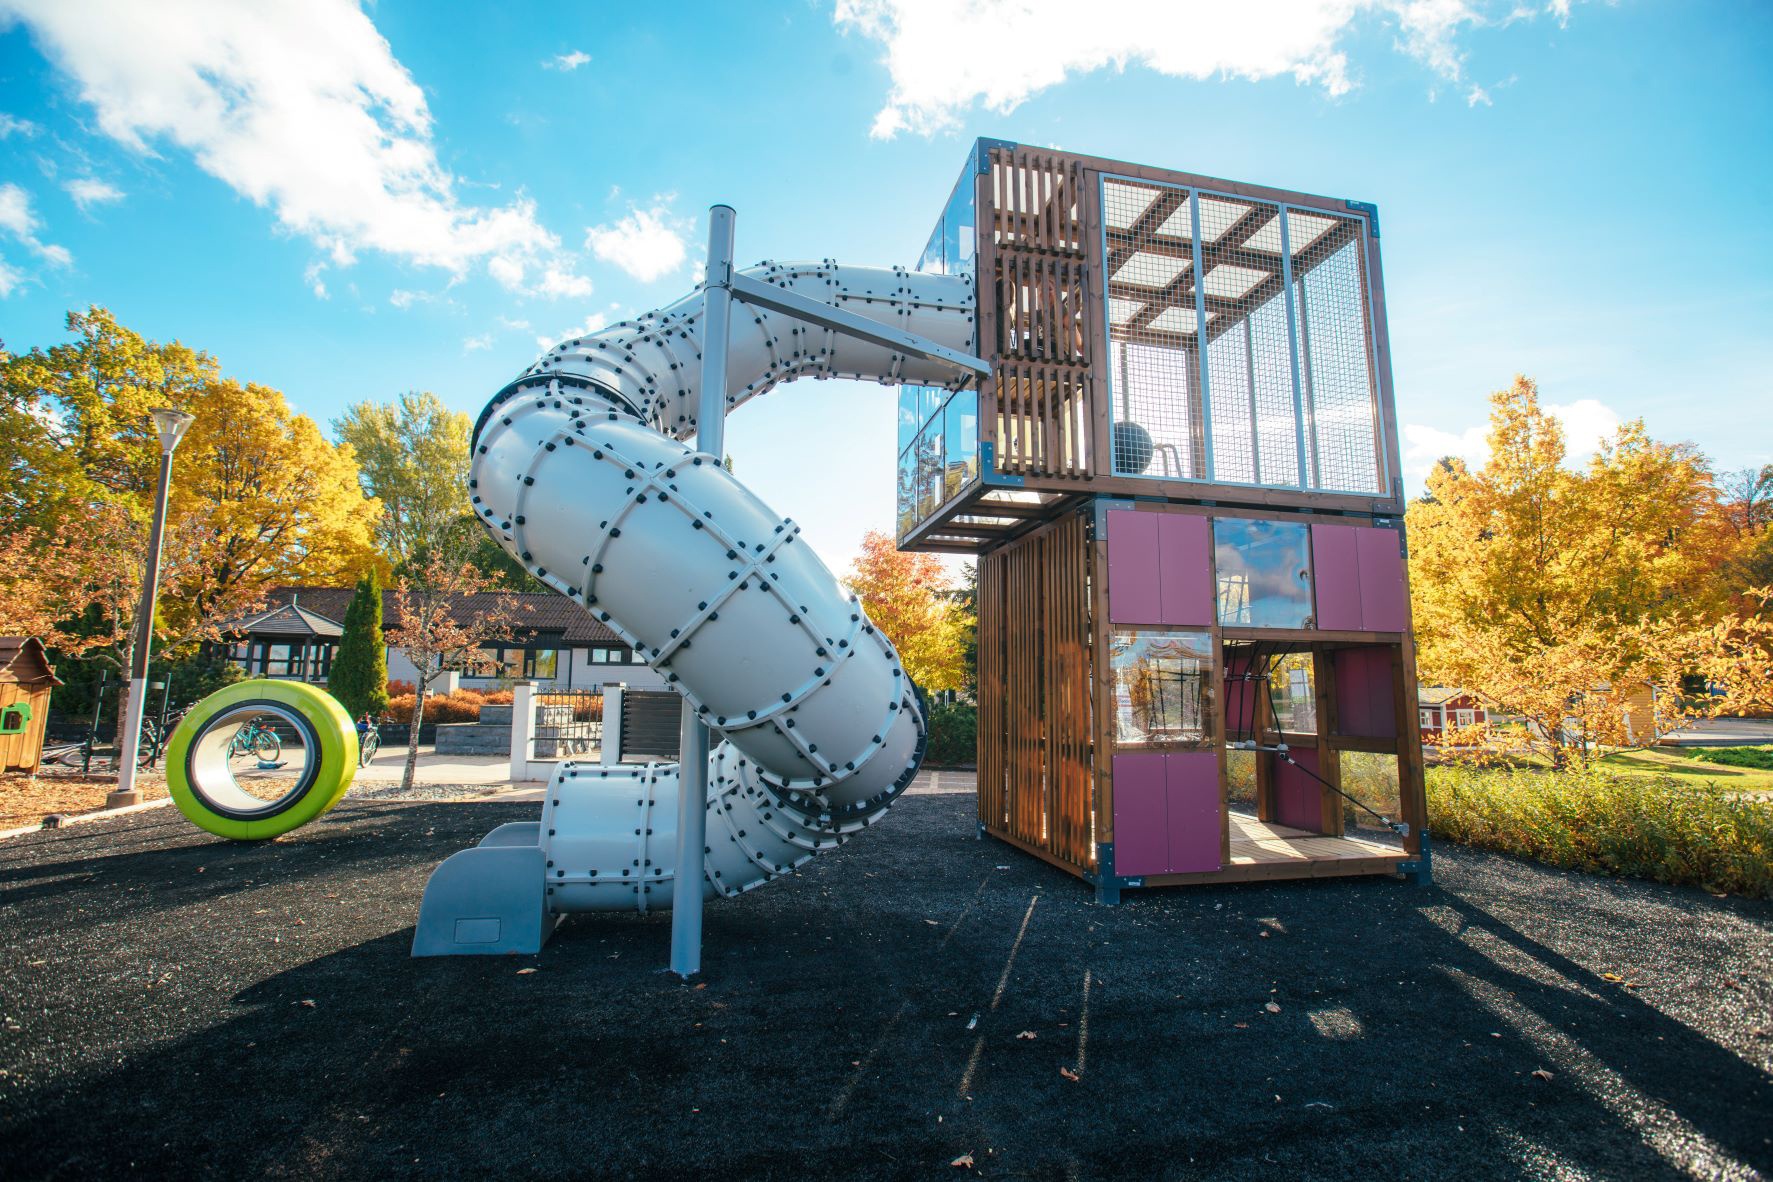 Modern and Architectural Playground Structures